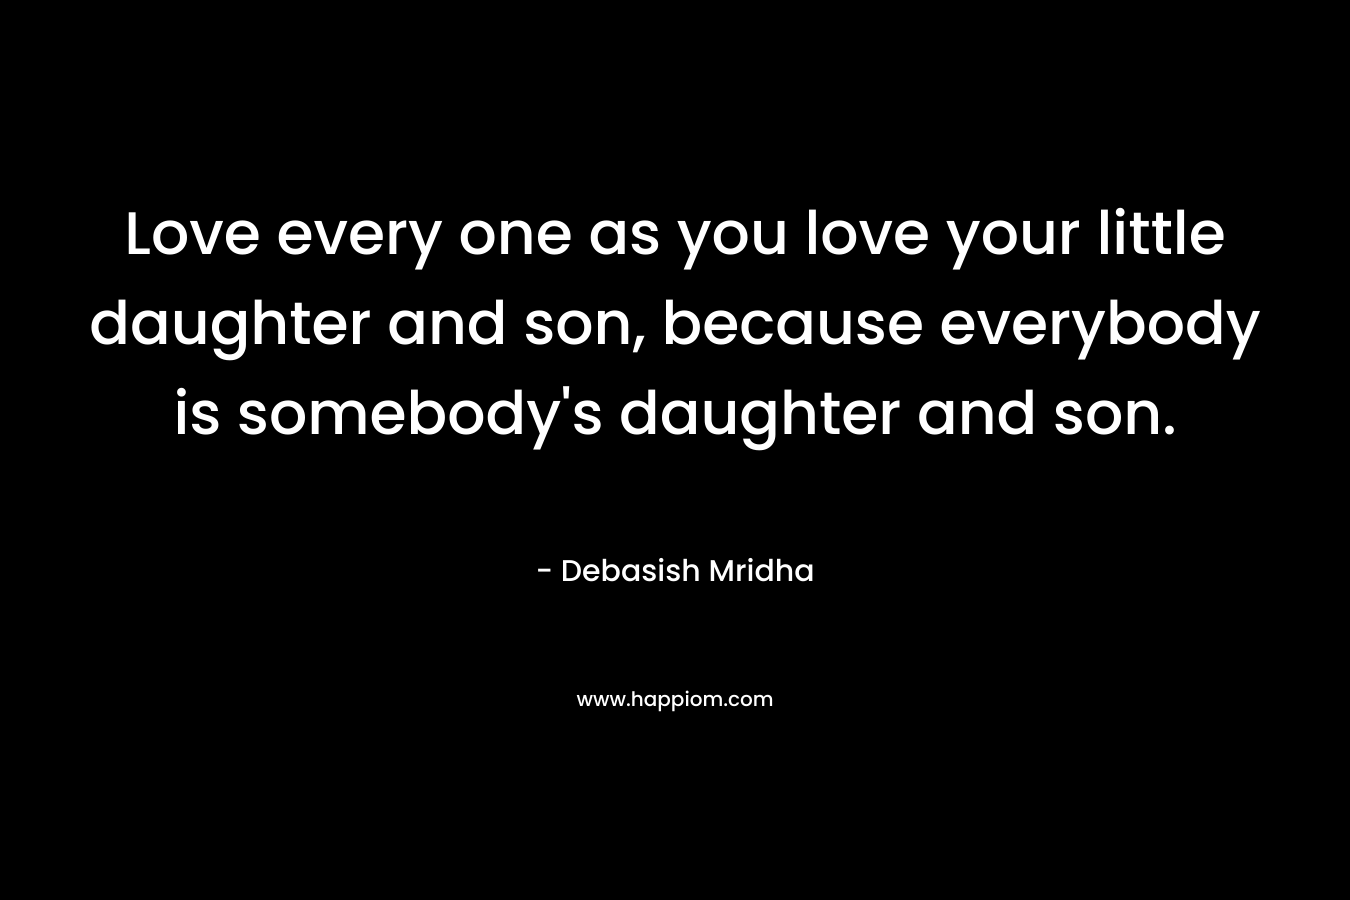 Love every one as you love your little daughter and son, because everybody is somebody's daughter and son.